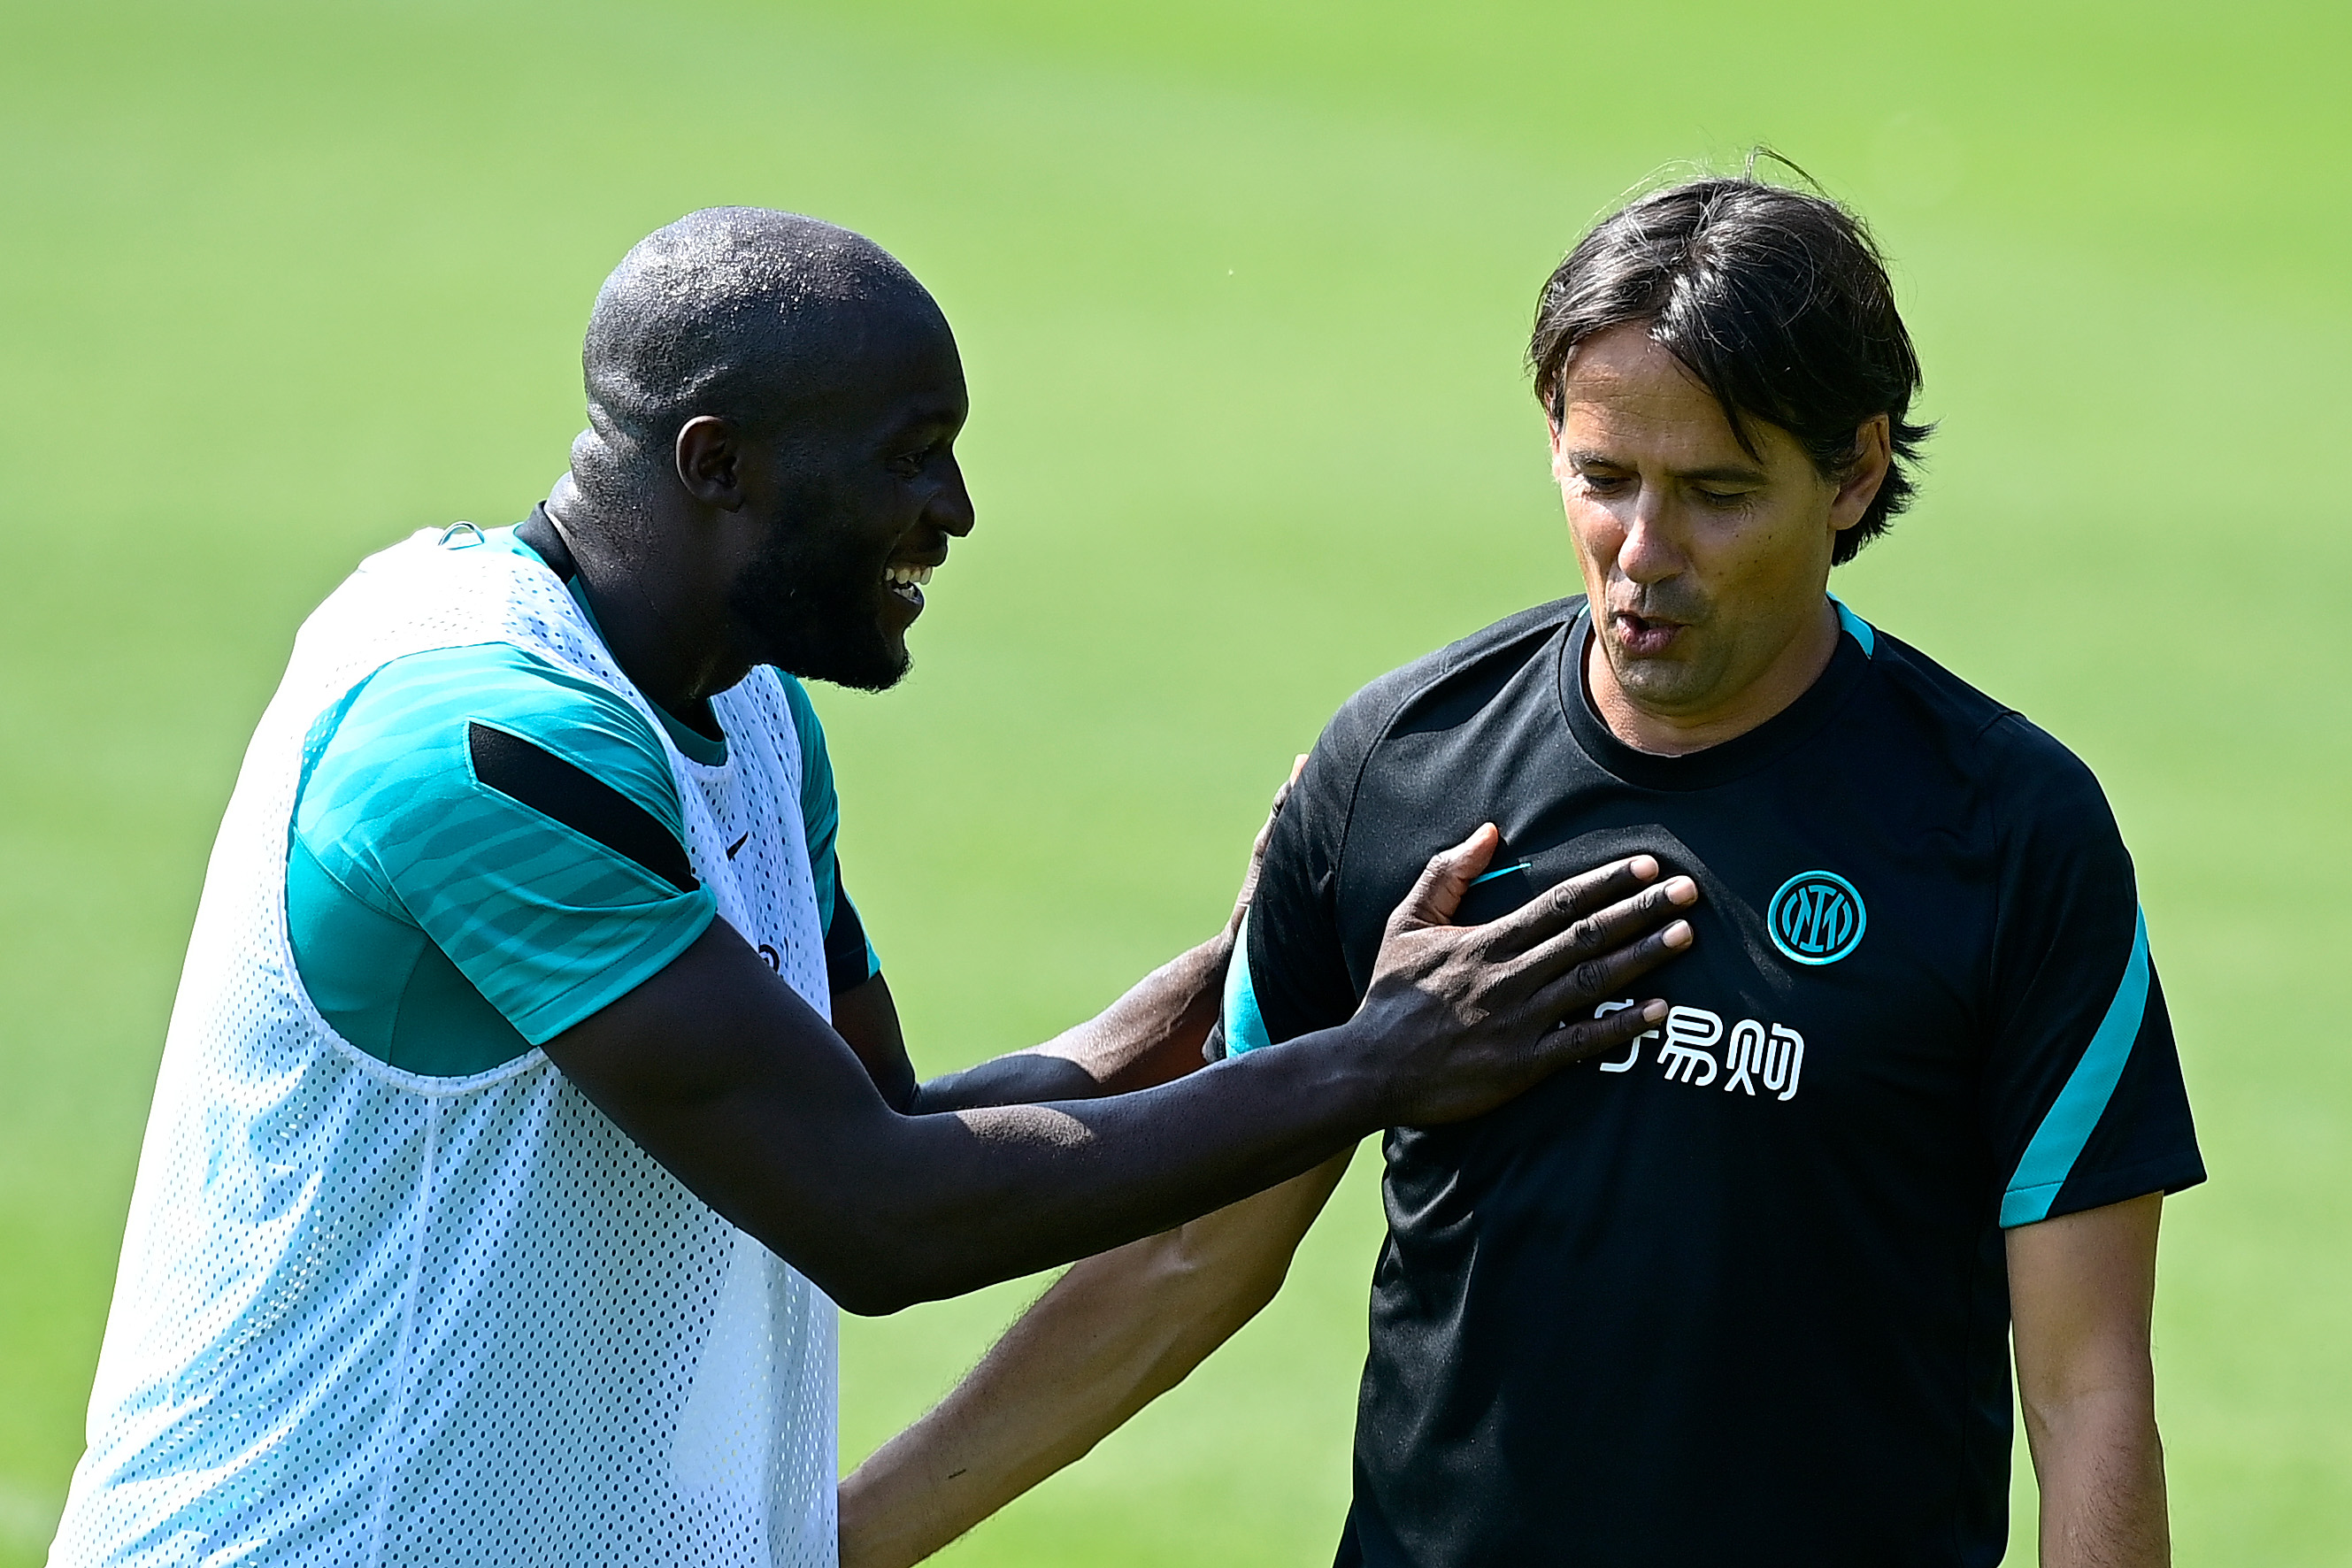 COMO, ITALY - JULY 29: Romelu Lukaku of FC Internazionale and Head Coach Simone Inzaghi of FC Internazionale smile during the FC Internazionale training session at the club's training ground Suning Training Center at Appiano Gentile on July 29, 2021 in Como, Italy. (Photo by Mattia Ozbot - Inter/Inter via Getty Images)